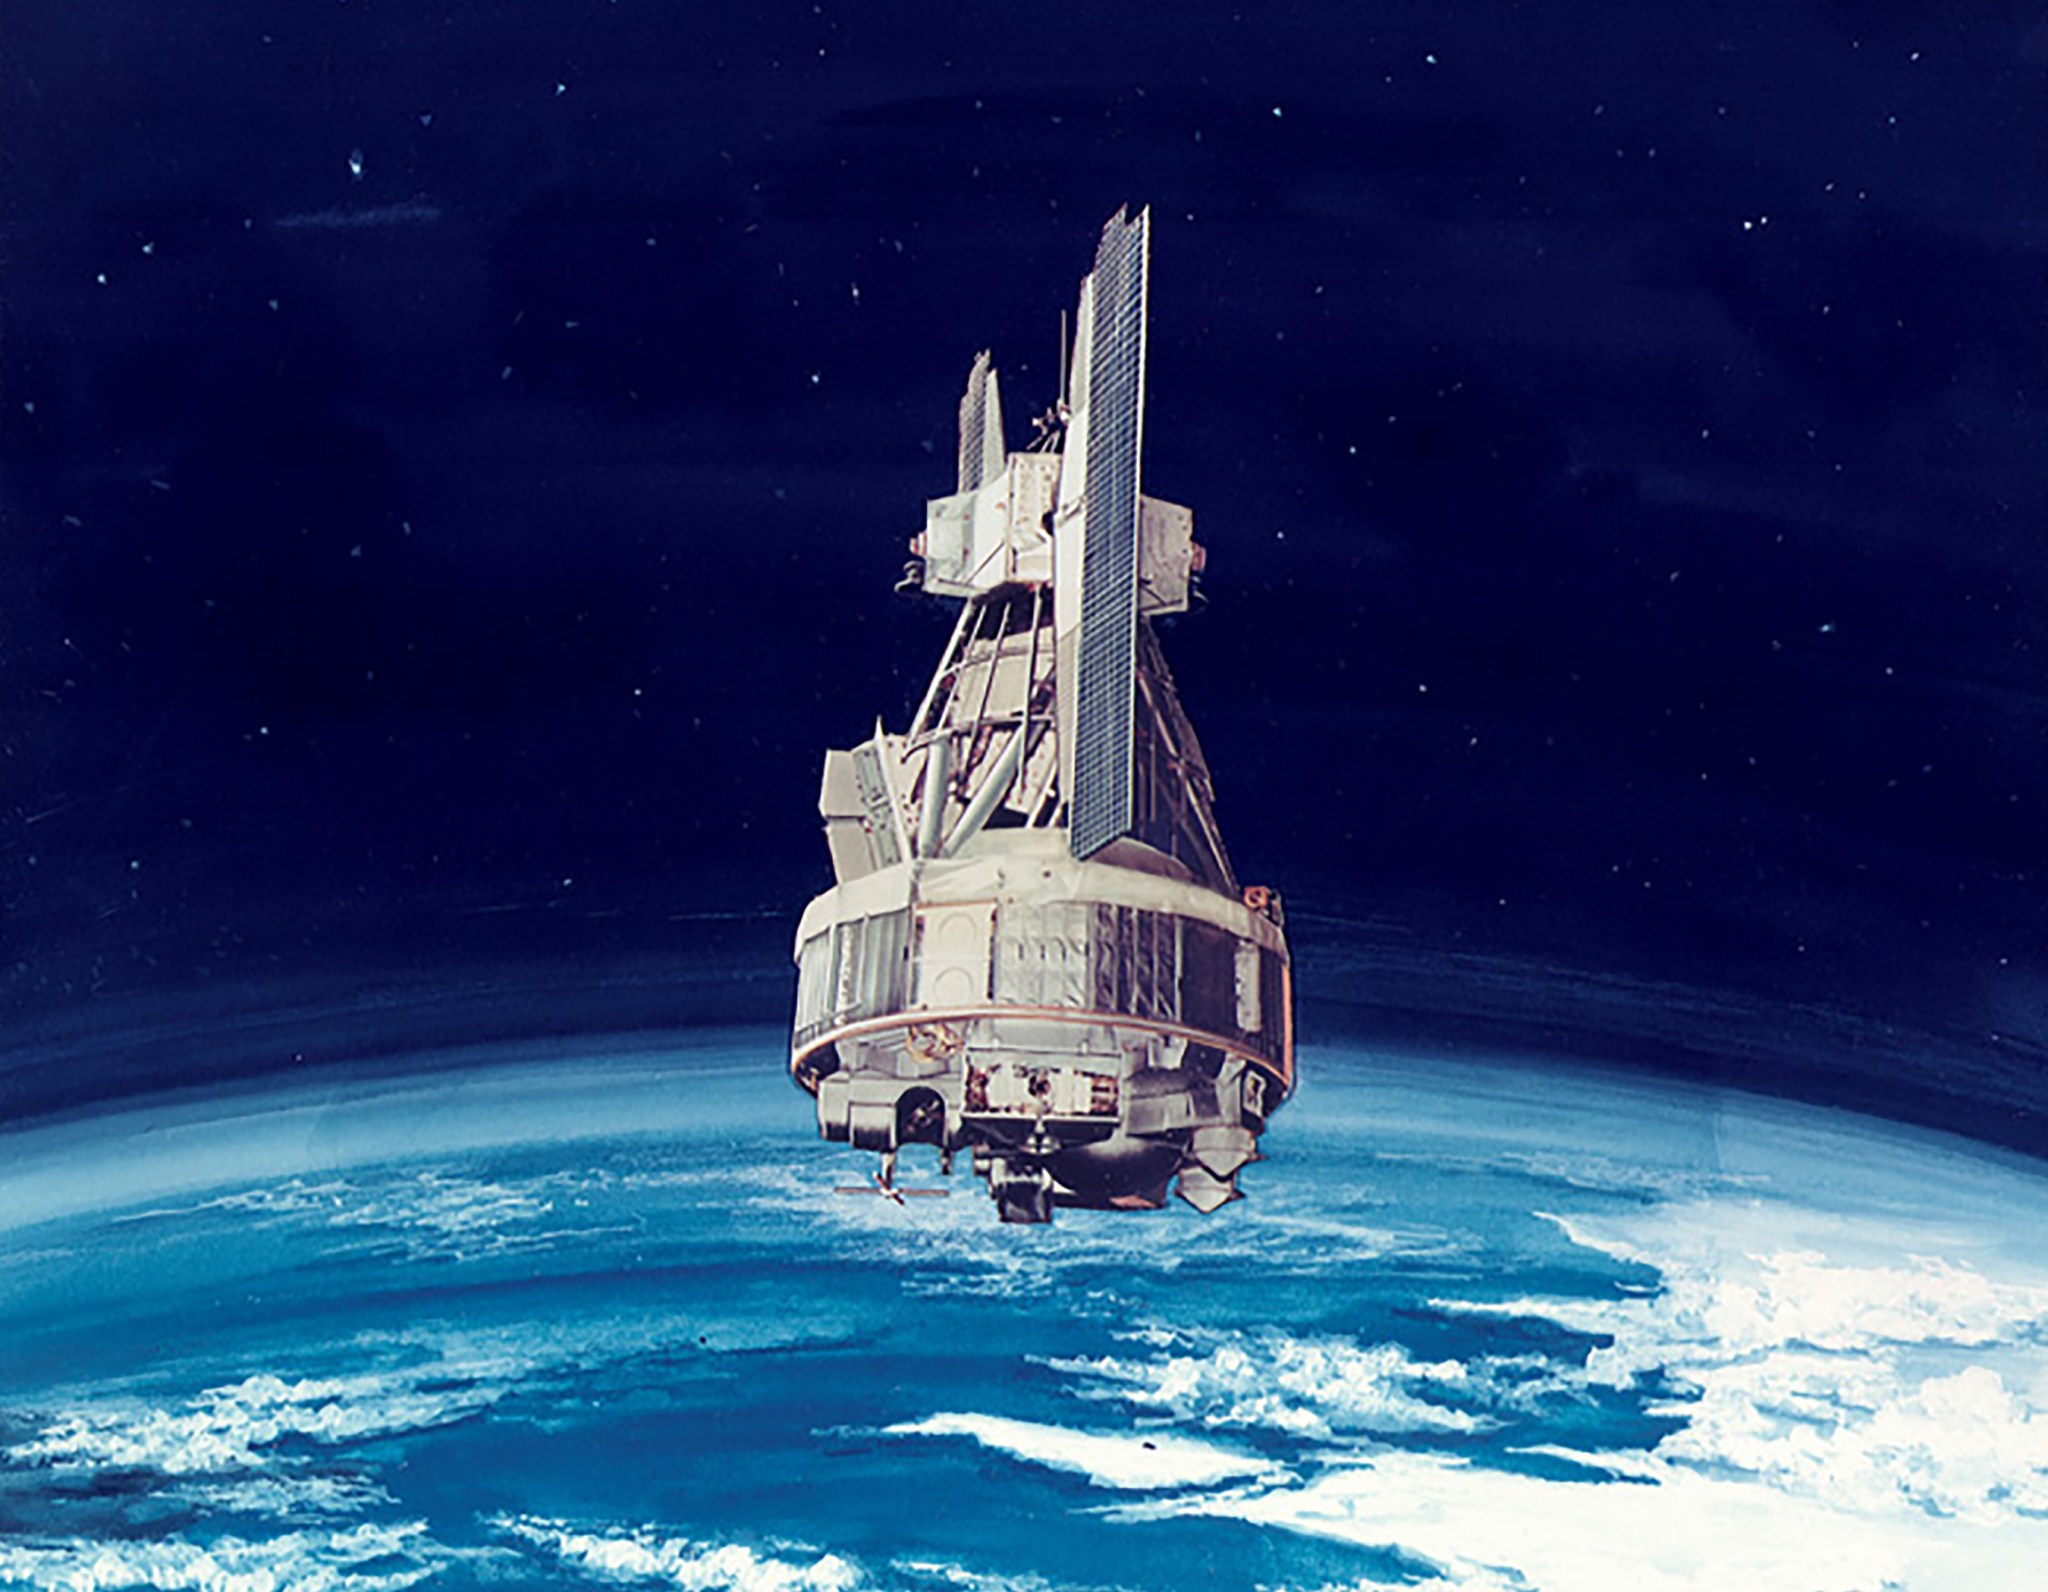 Older artist's rendering of the Nimbus-3 spacecraft against the limb of Earth. The spacecraft is roughly cone shaped and mostly gold. 